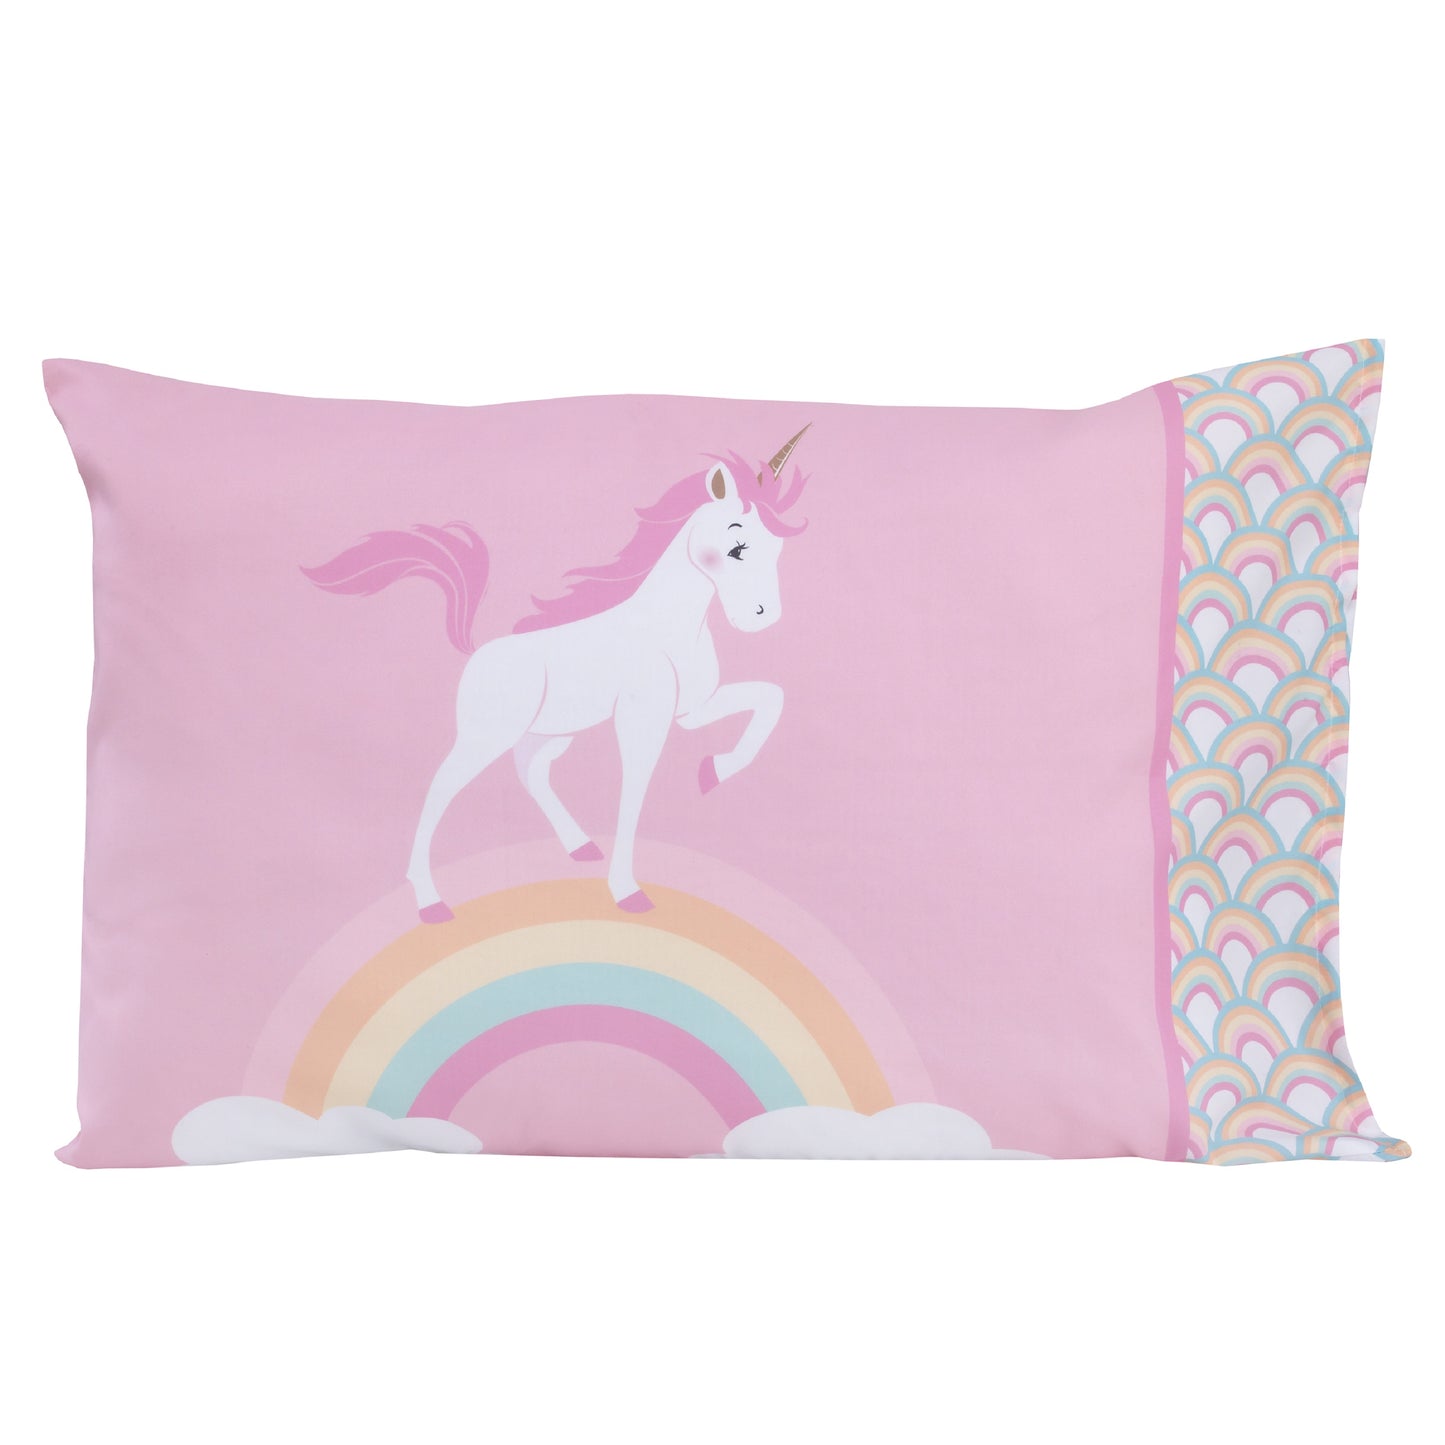 Everything Kids Rainbow Unicorn Pink, White and Rainbows 4 Piece Toddler Bed Set - Comforter, Fitted Bottom Sheet, Flat Top Sheet and Reversible Pillowcase